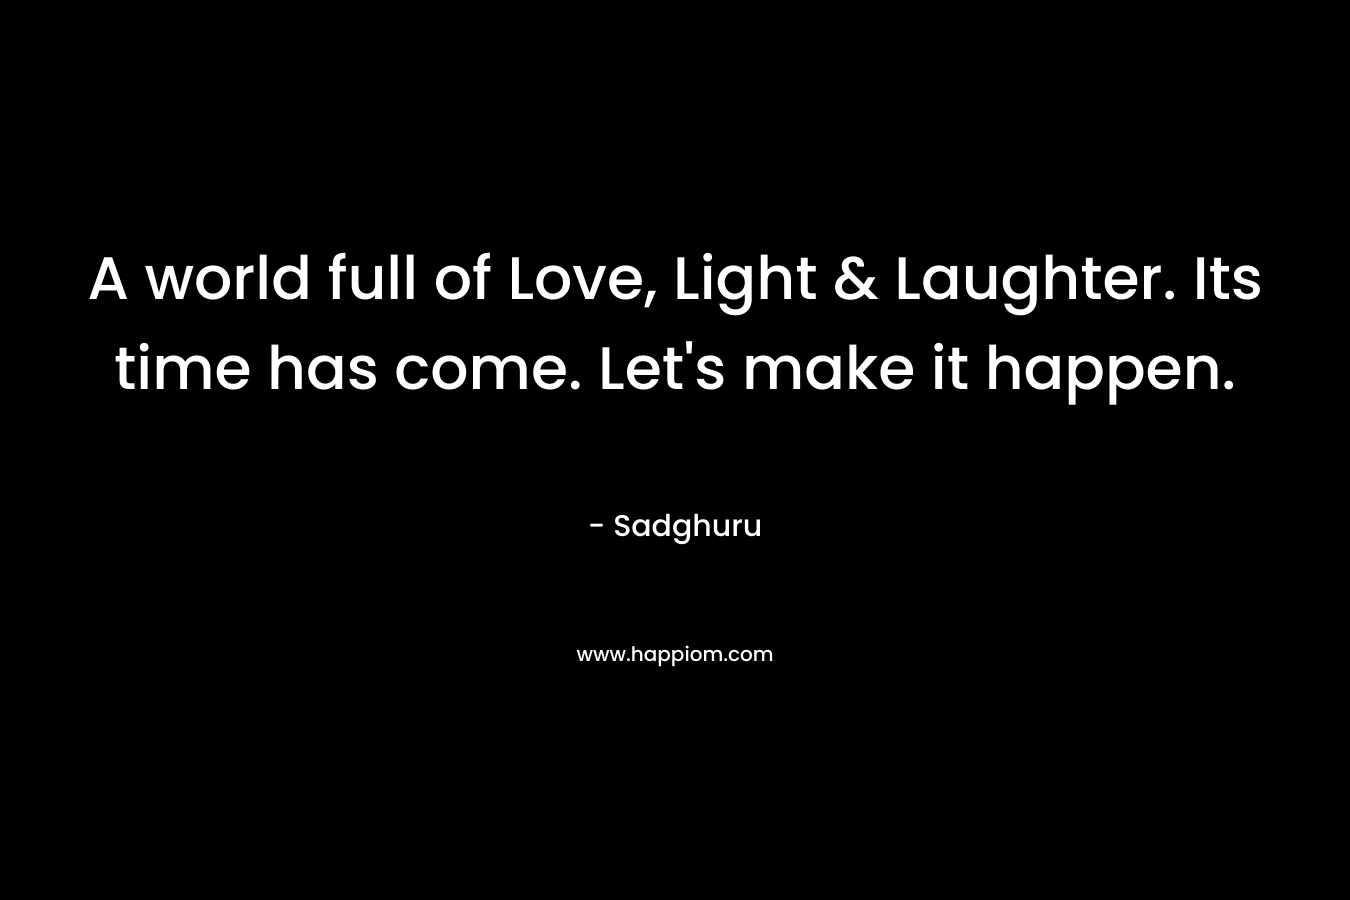 A world full of Love, Light & Laughter. Its time has come. Let's make it happen.